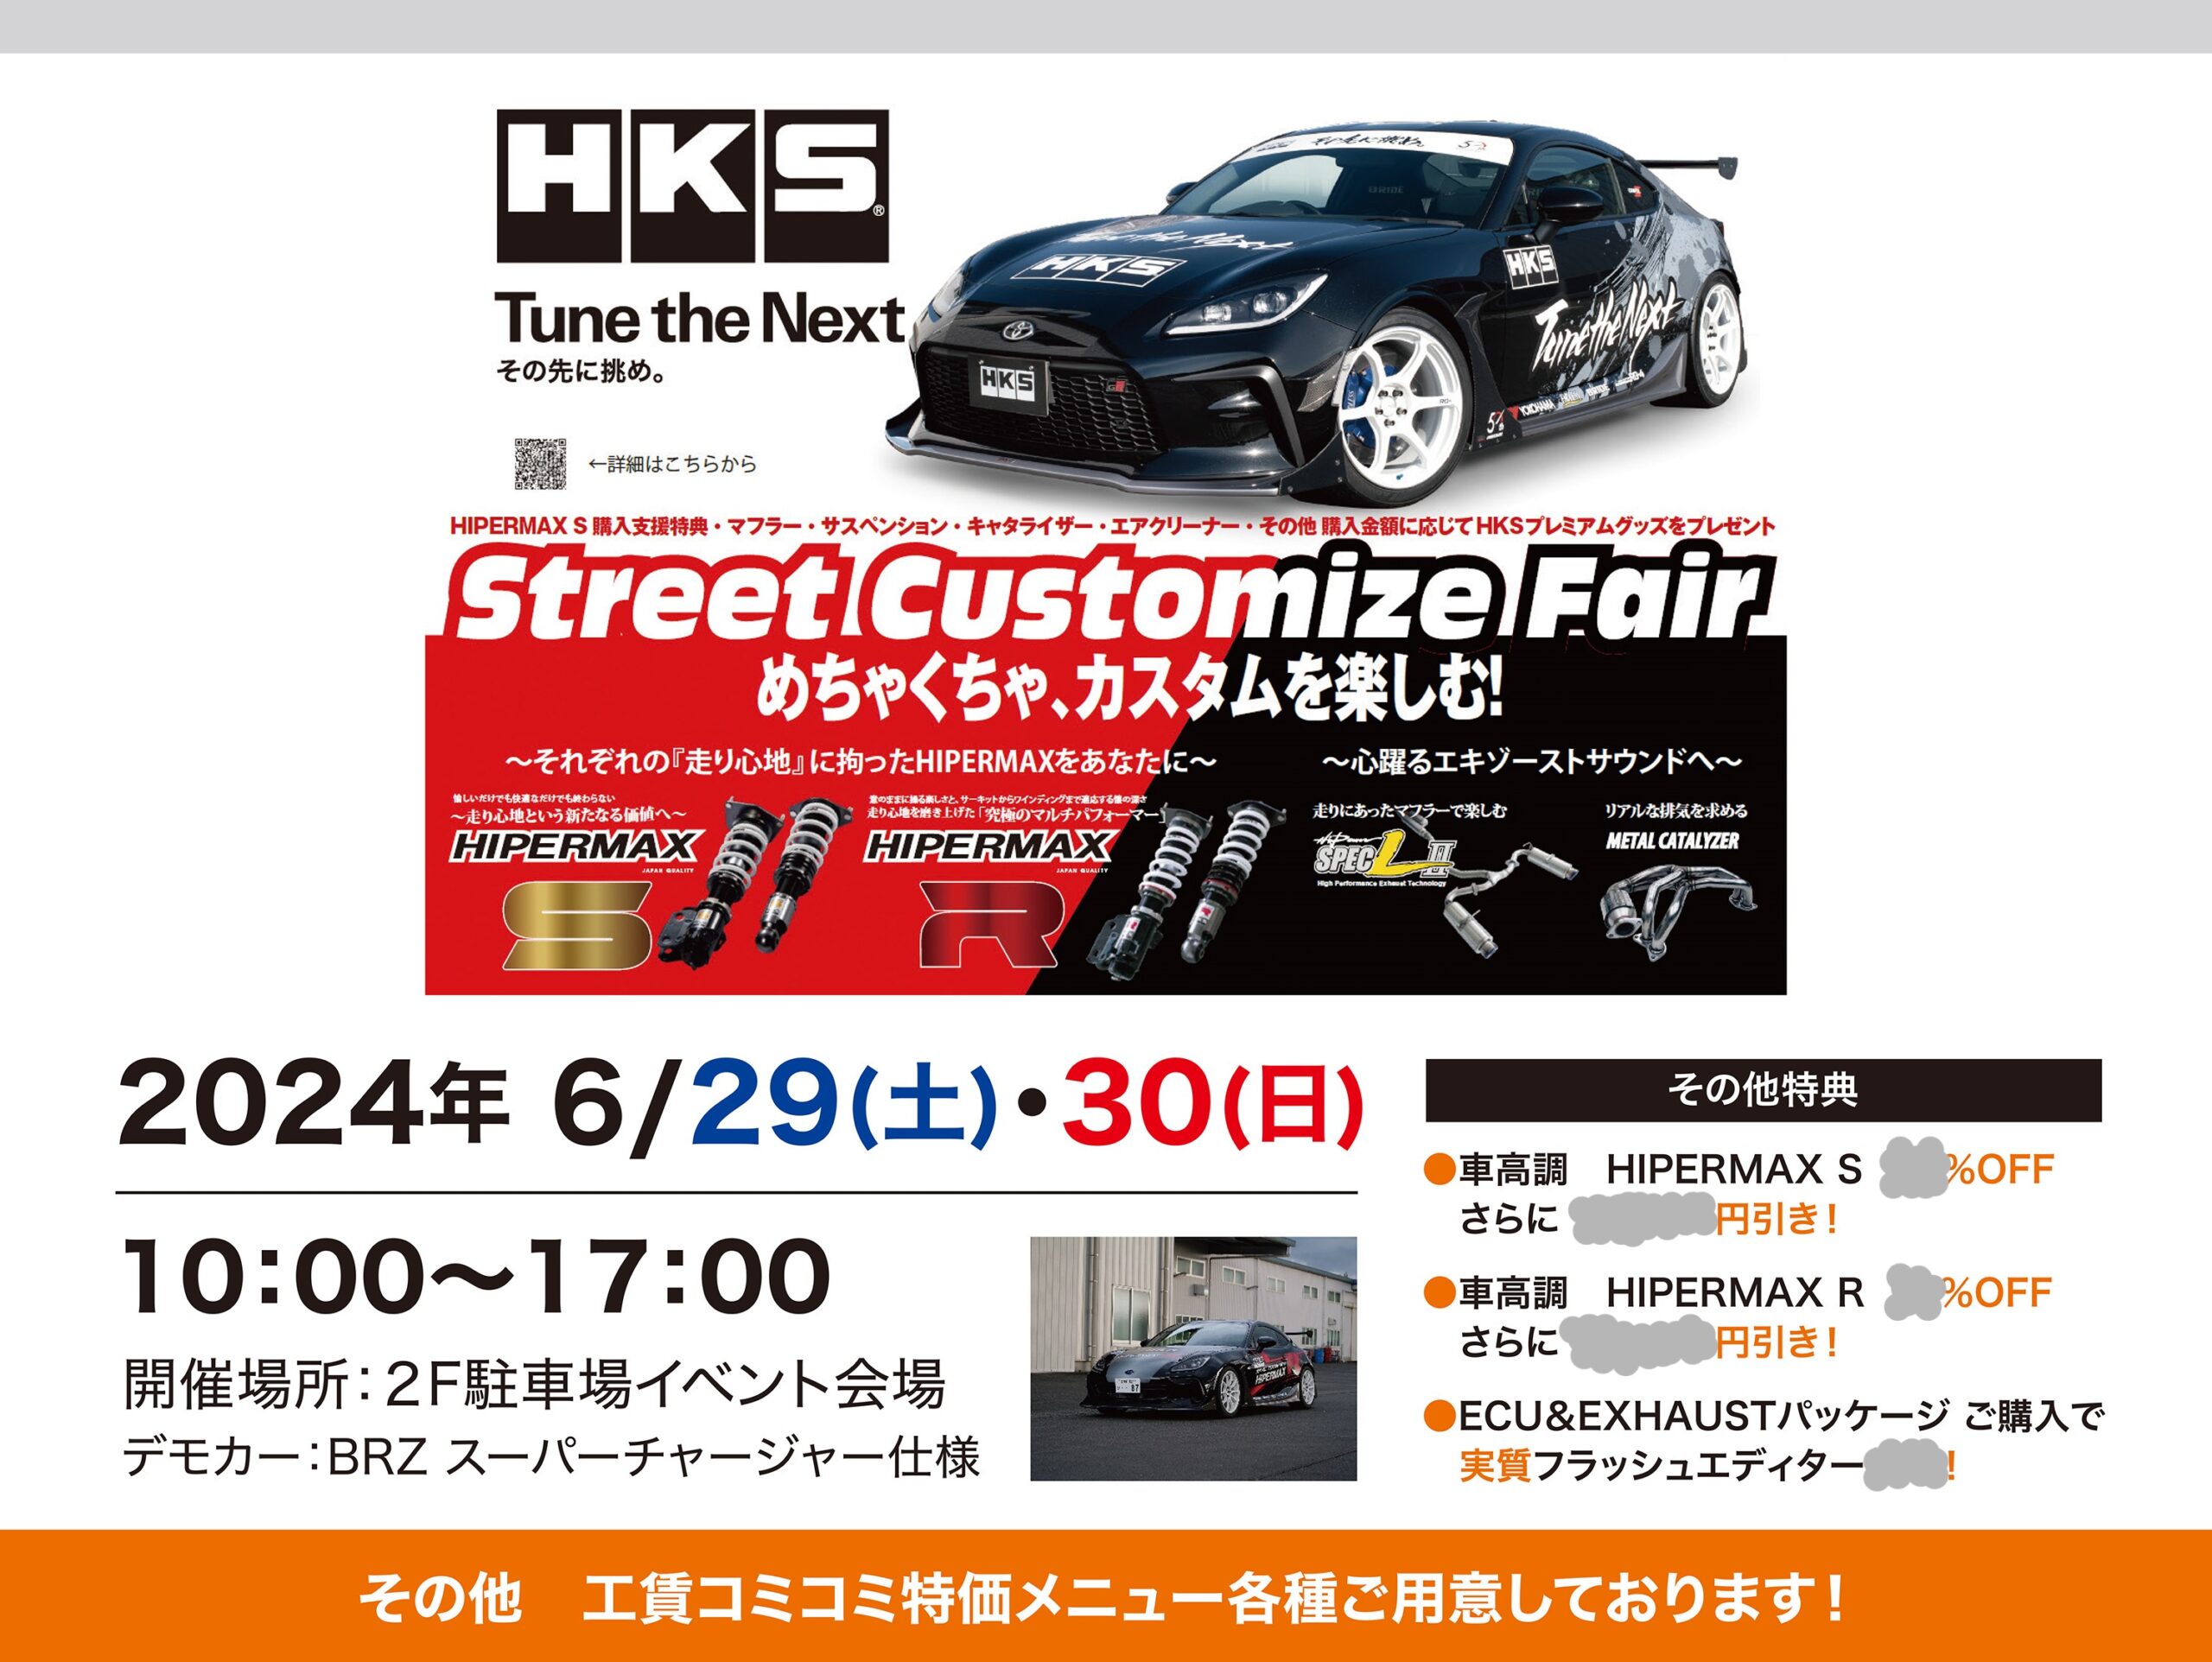 6/29-30 HKSストリートカスタマイズフェアー in A PIT KYOTO SHIJO